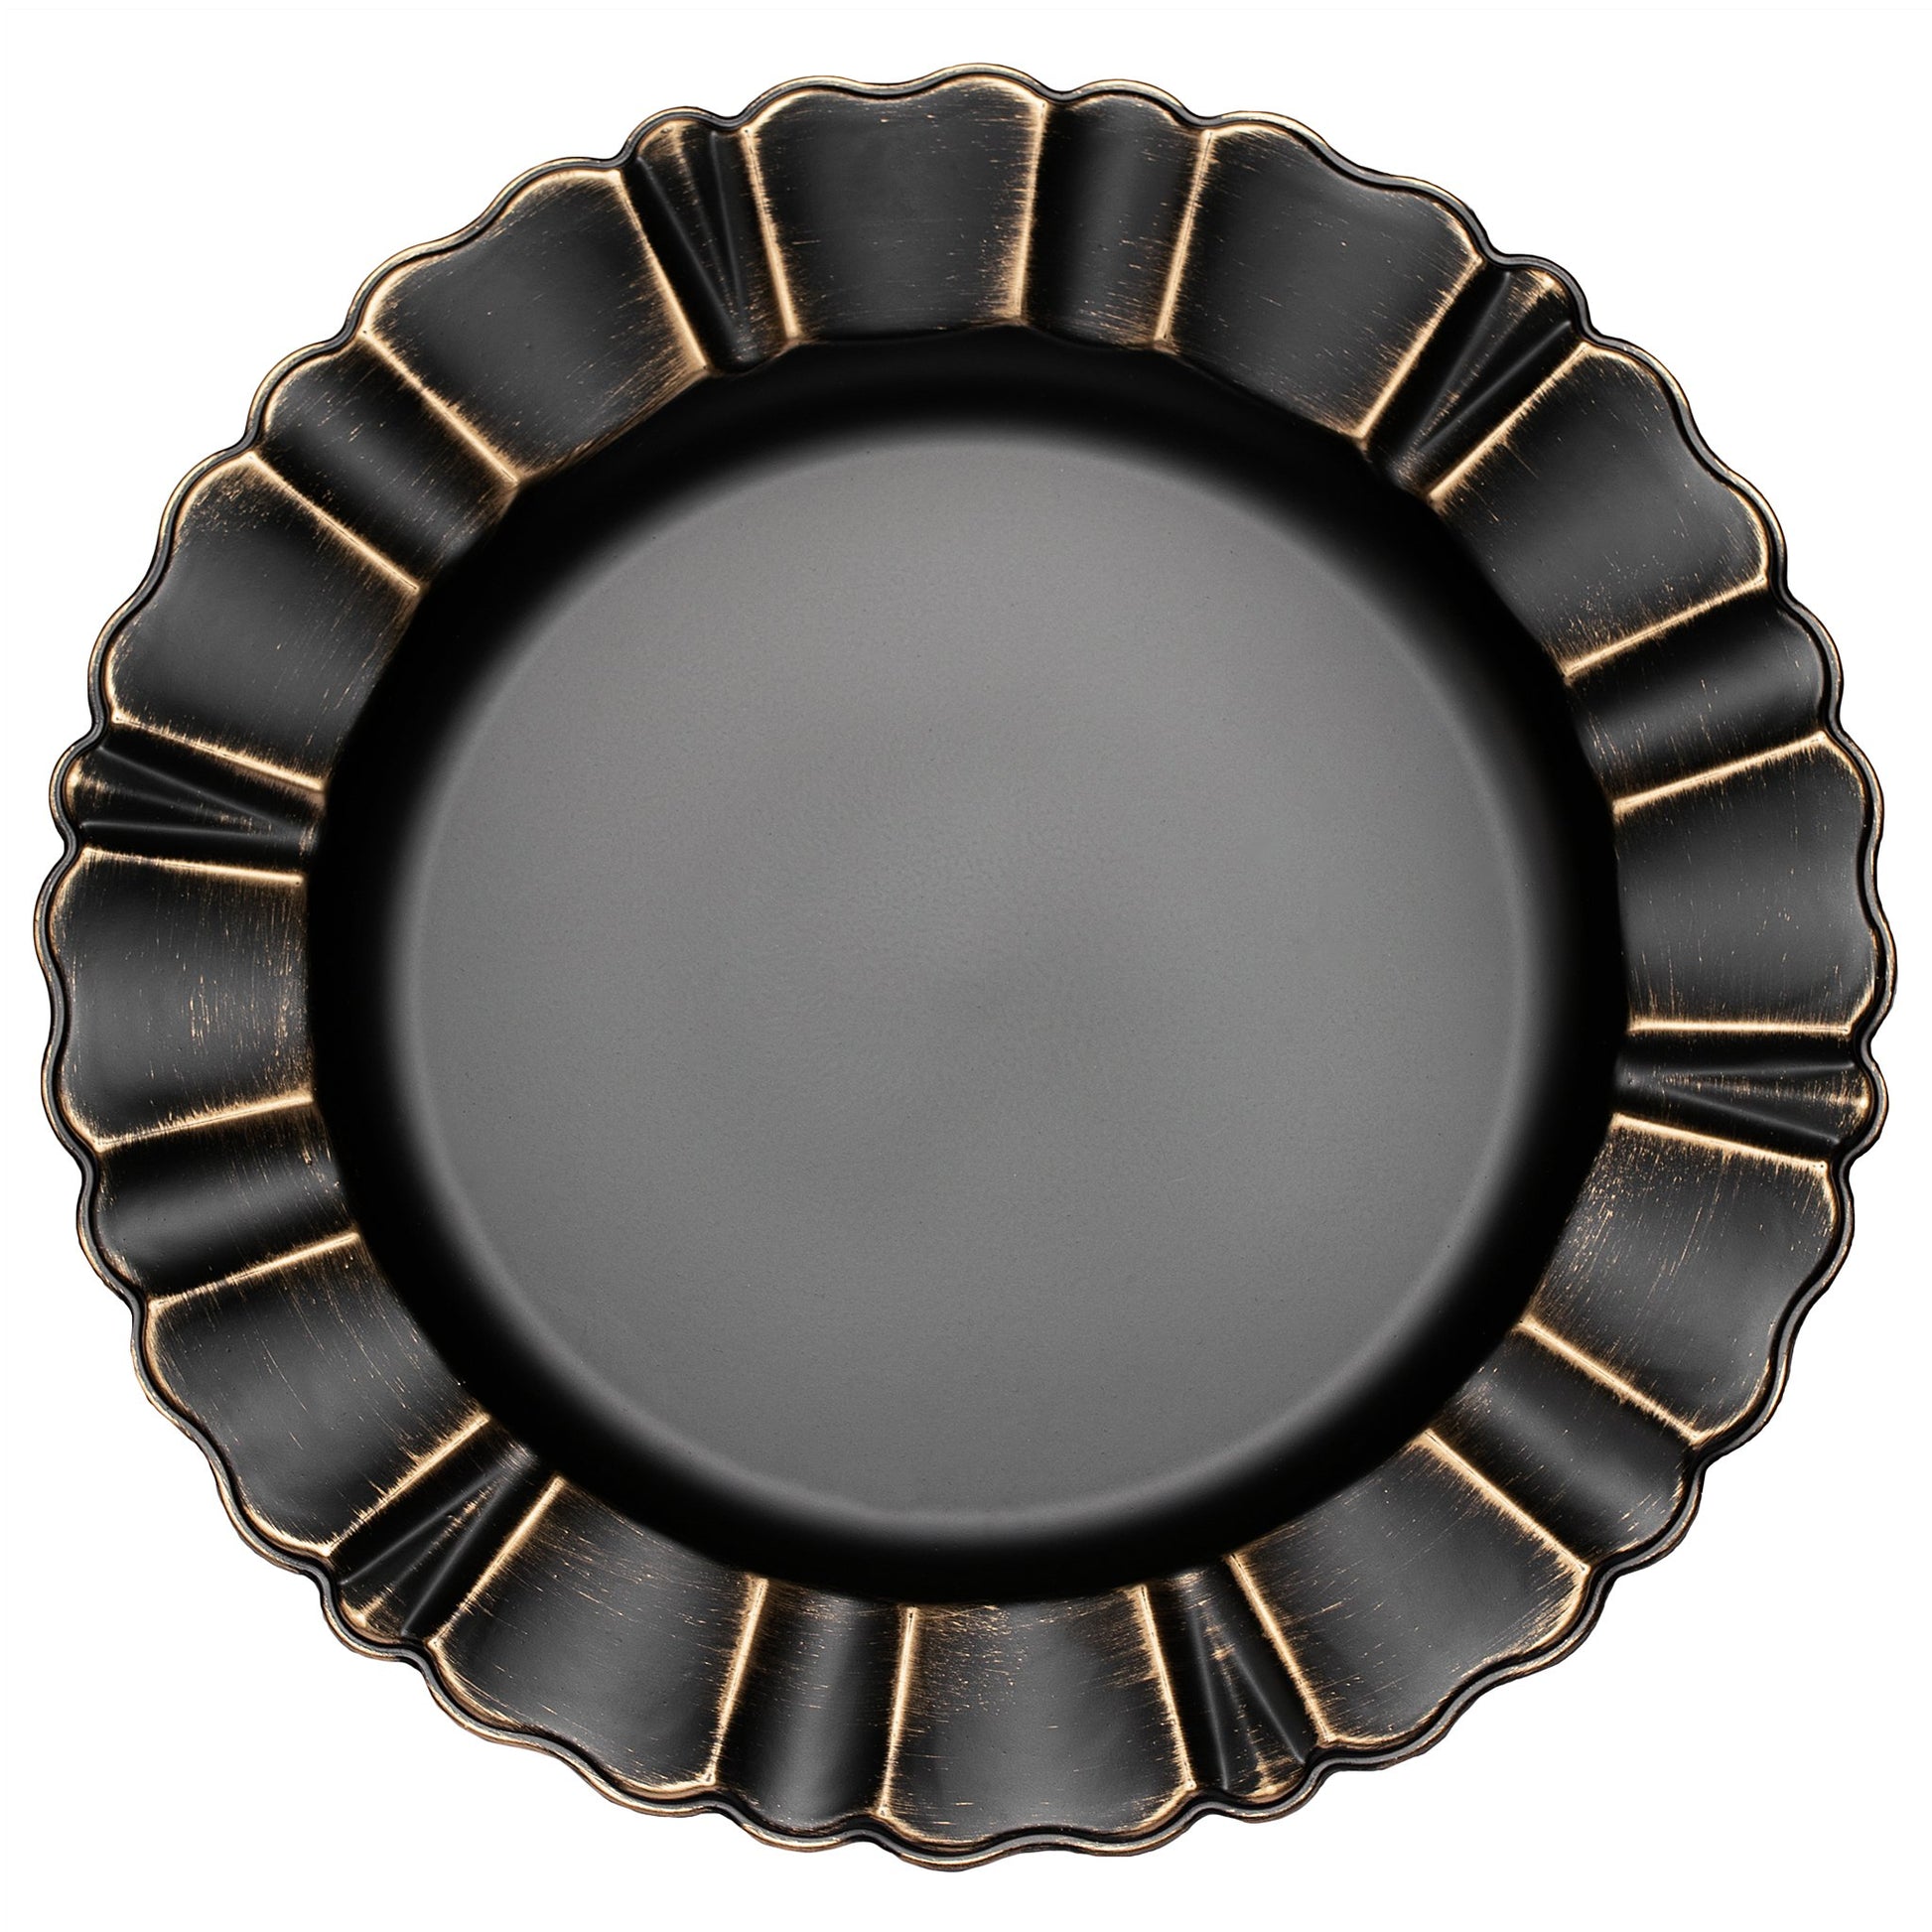 Waved Scalloped Acrylic 13" Charger Plate - Black & Gold - CV Linens